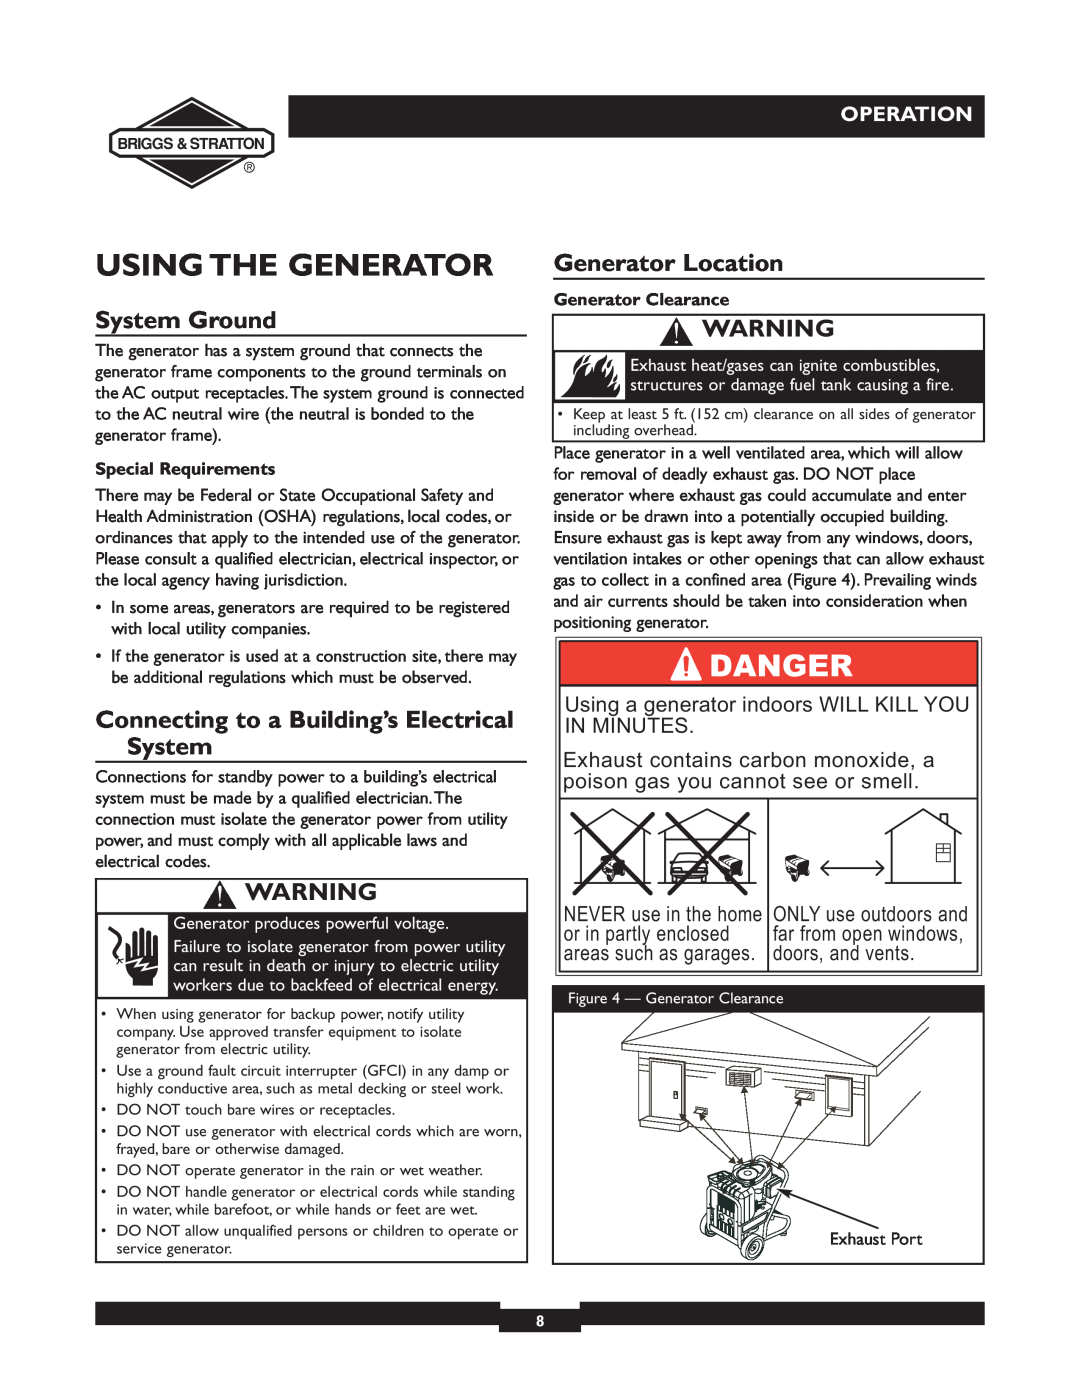 Briggs & Stratton 01894-1 Using The Generator, System Ground, Connecting to a Building’s Electrical System, Operation 